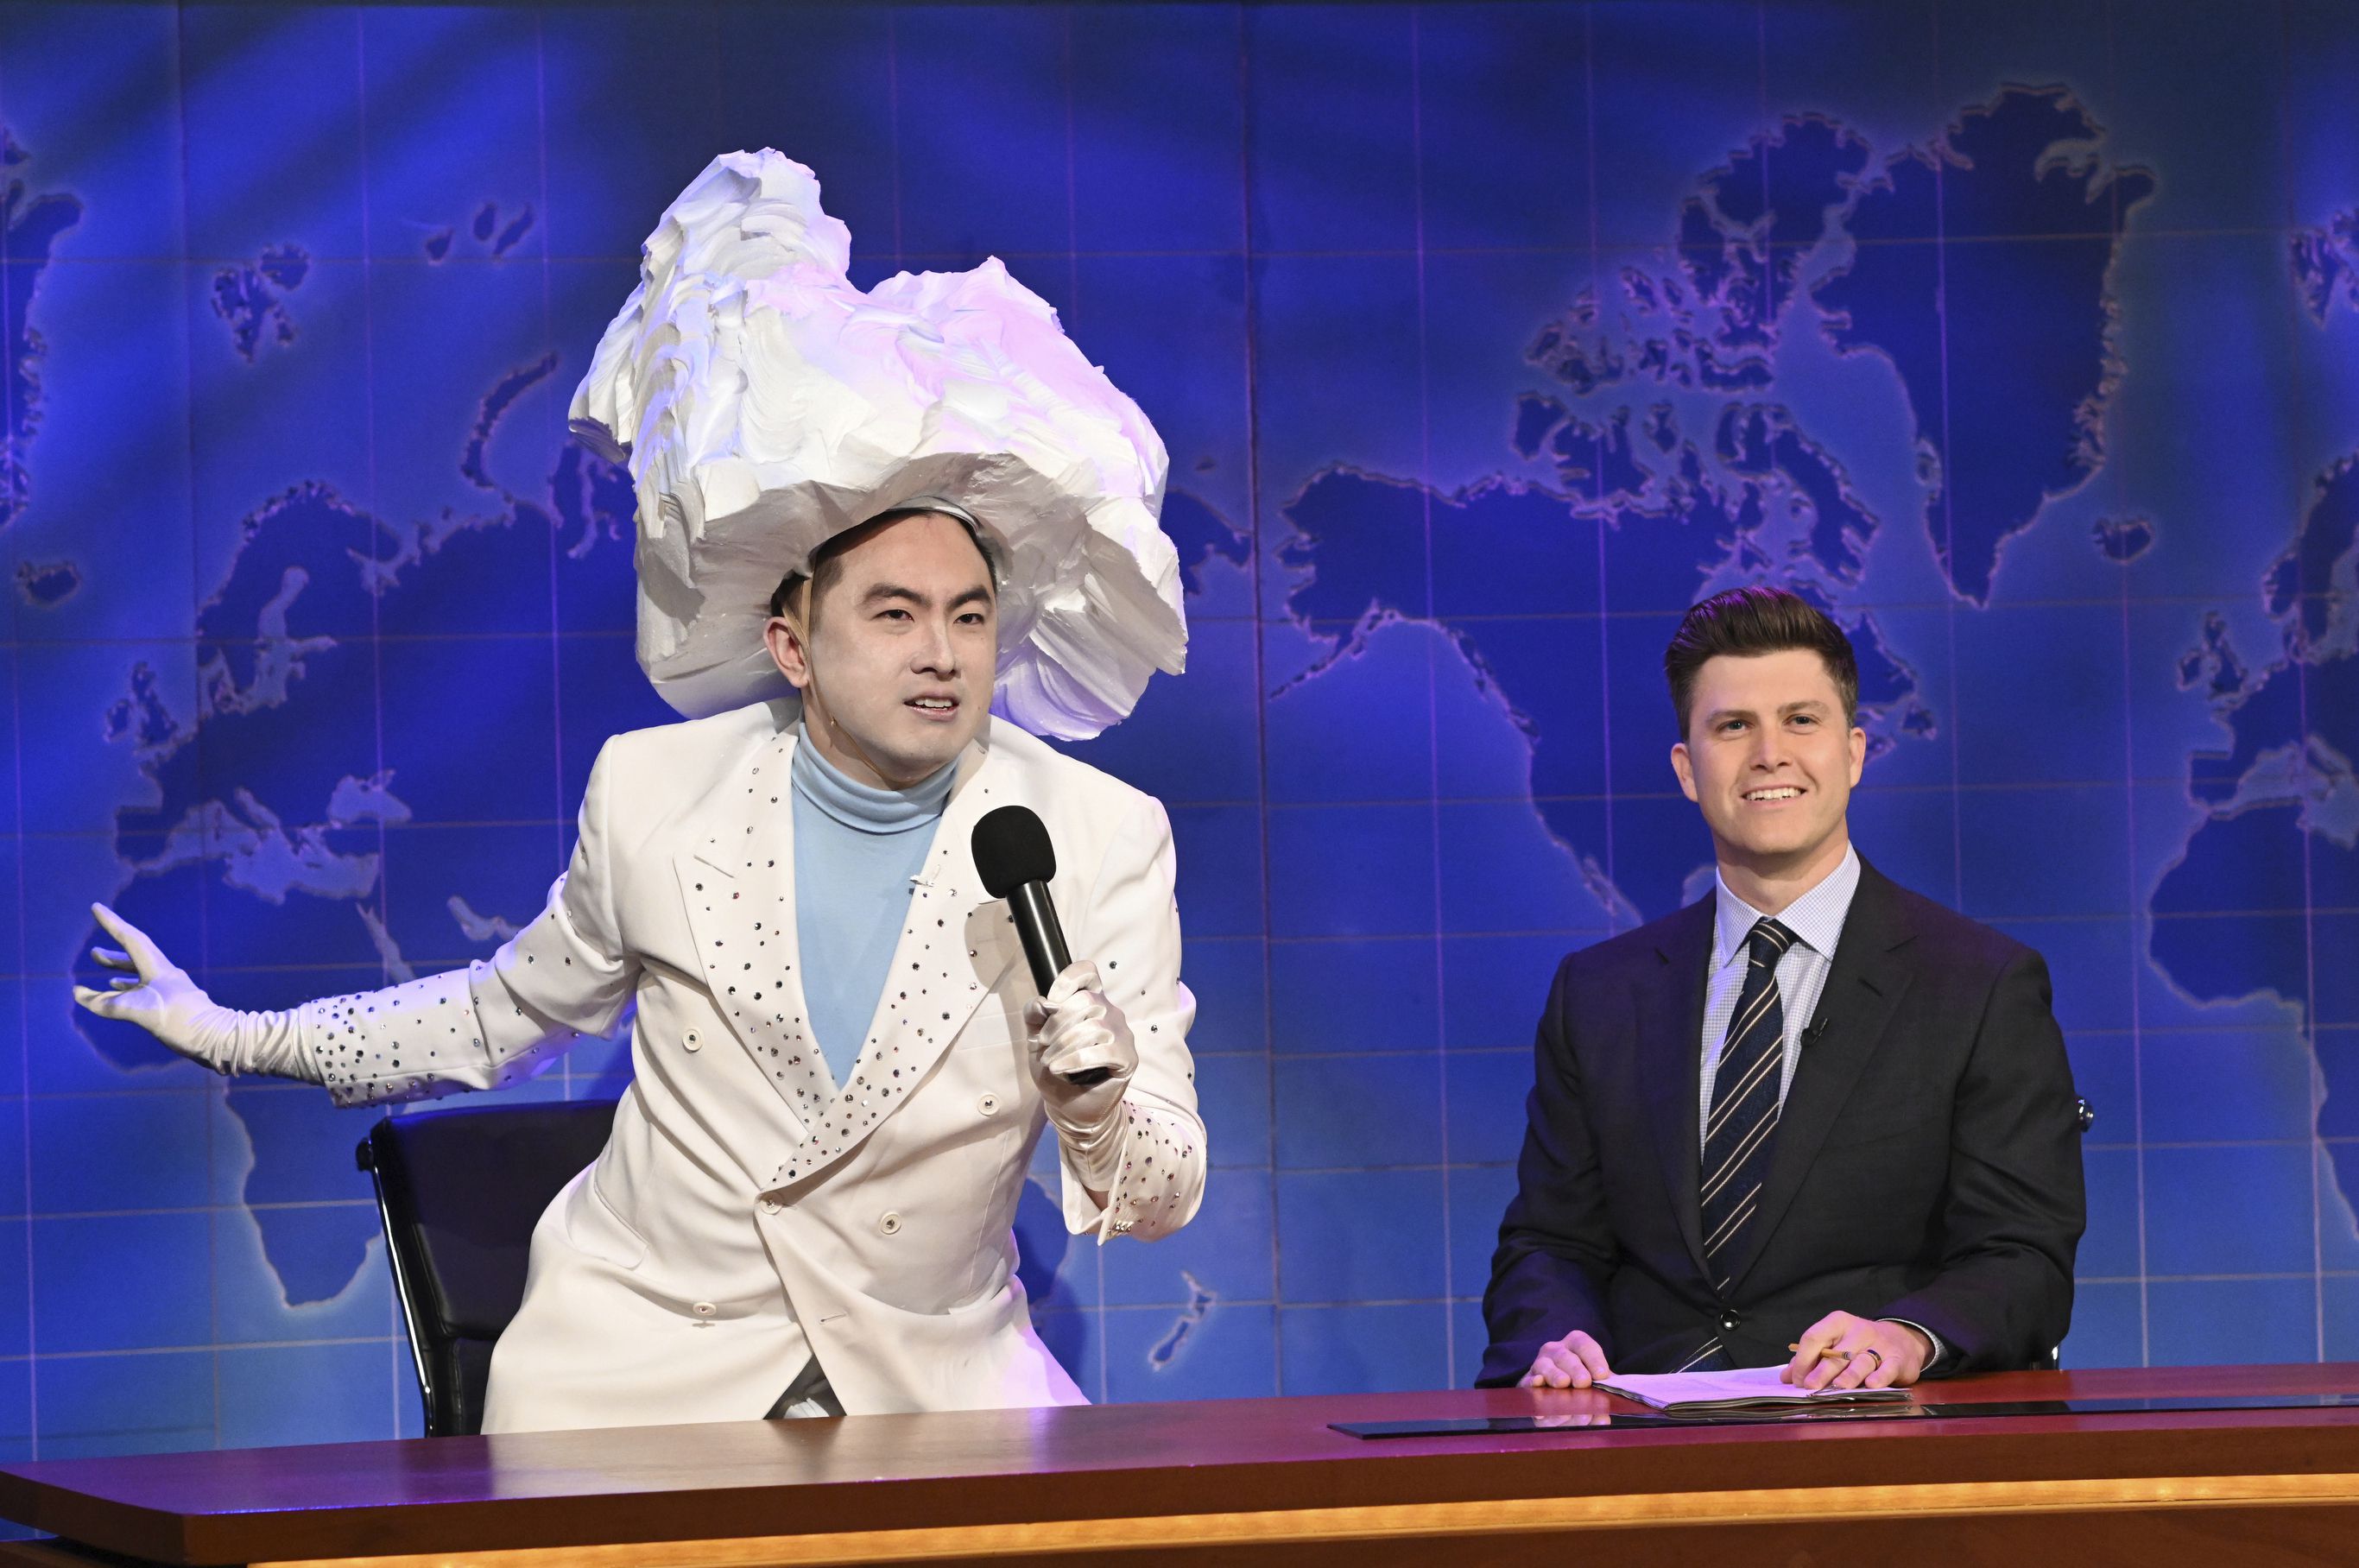 ‘SNL’ ditches audience, limits cast and crew amid omicron